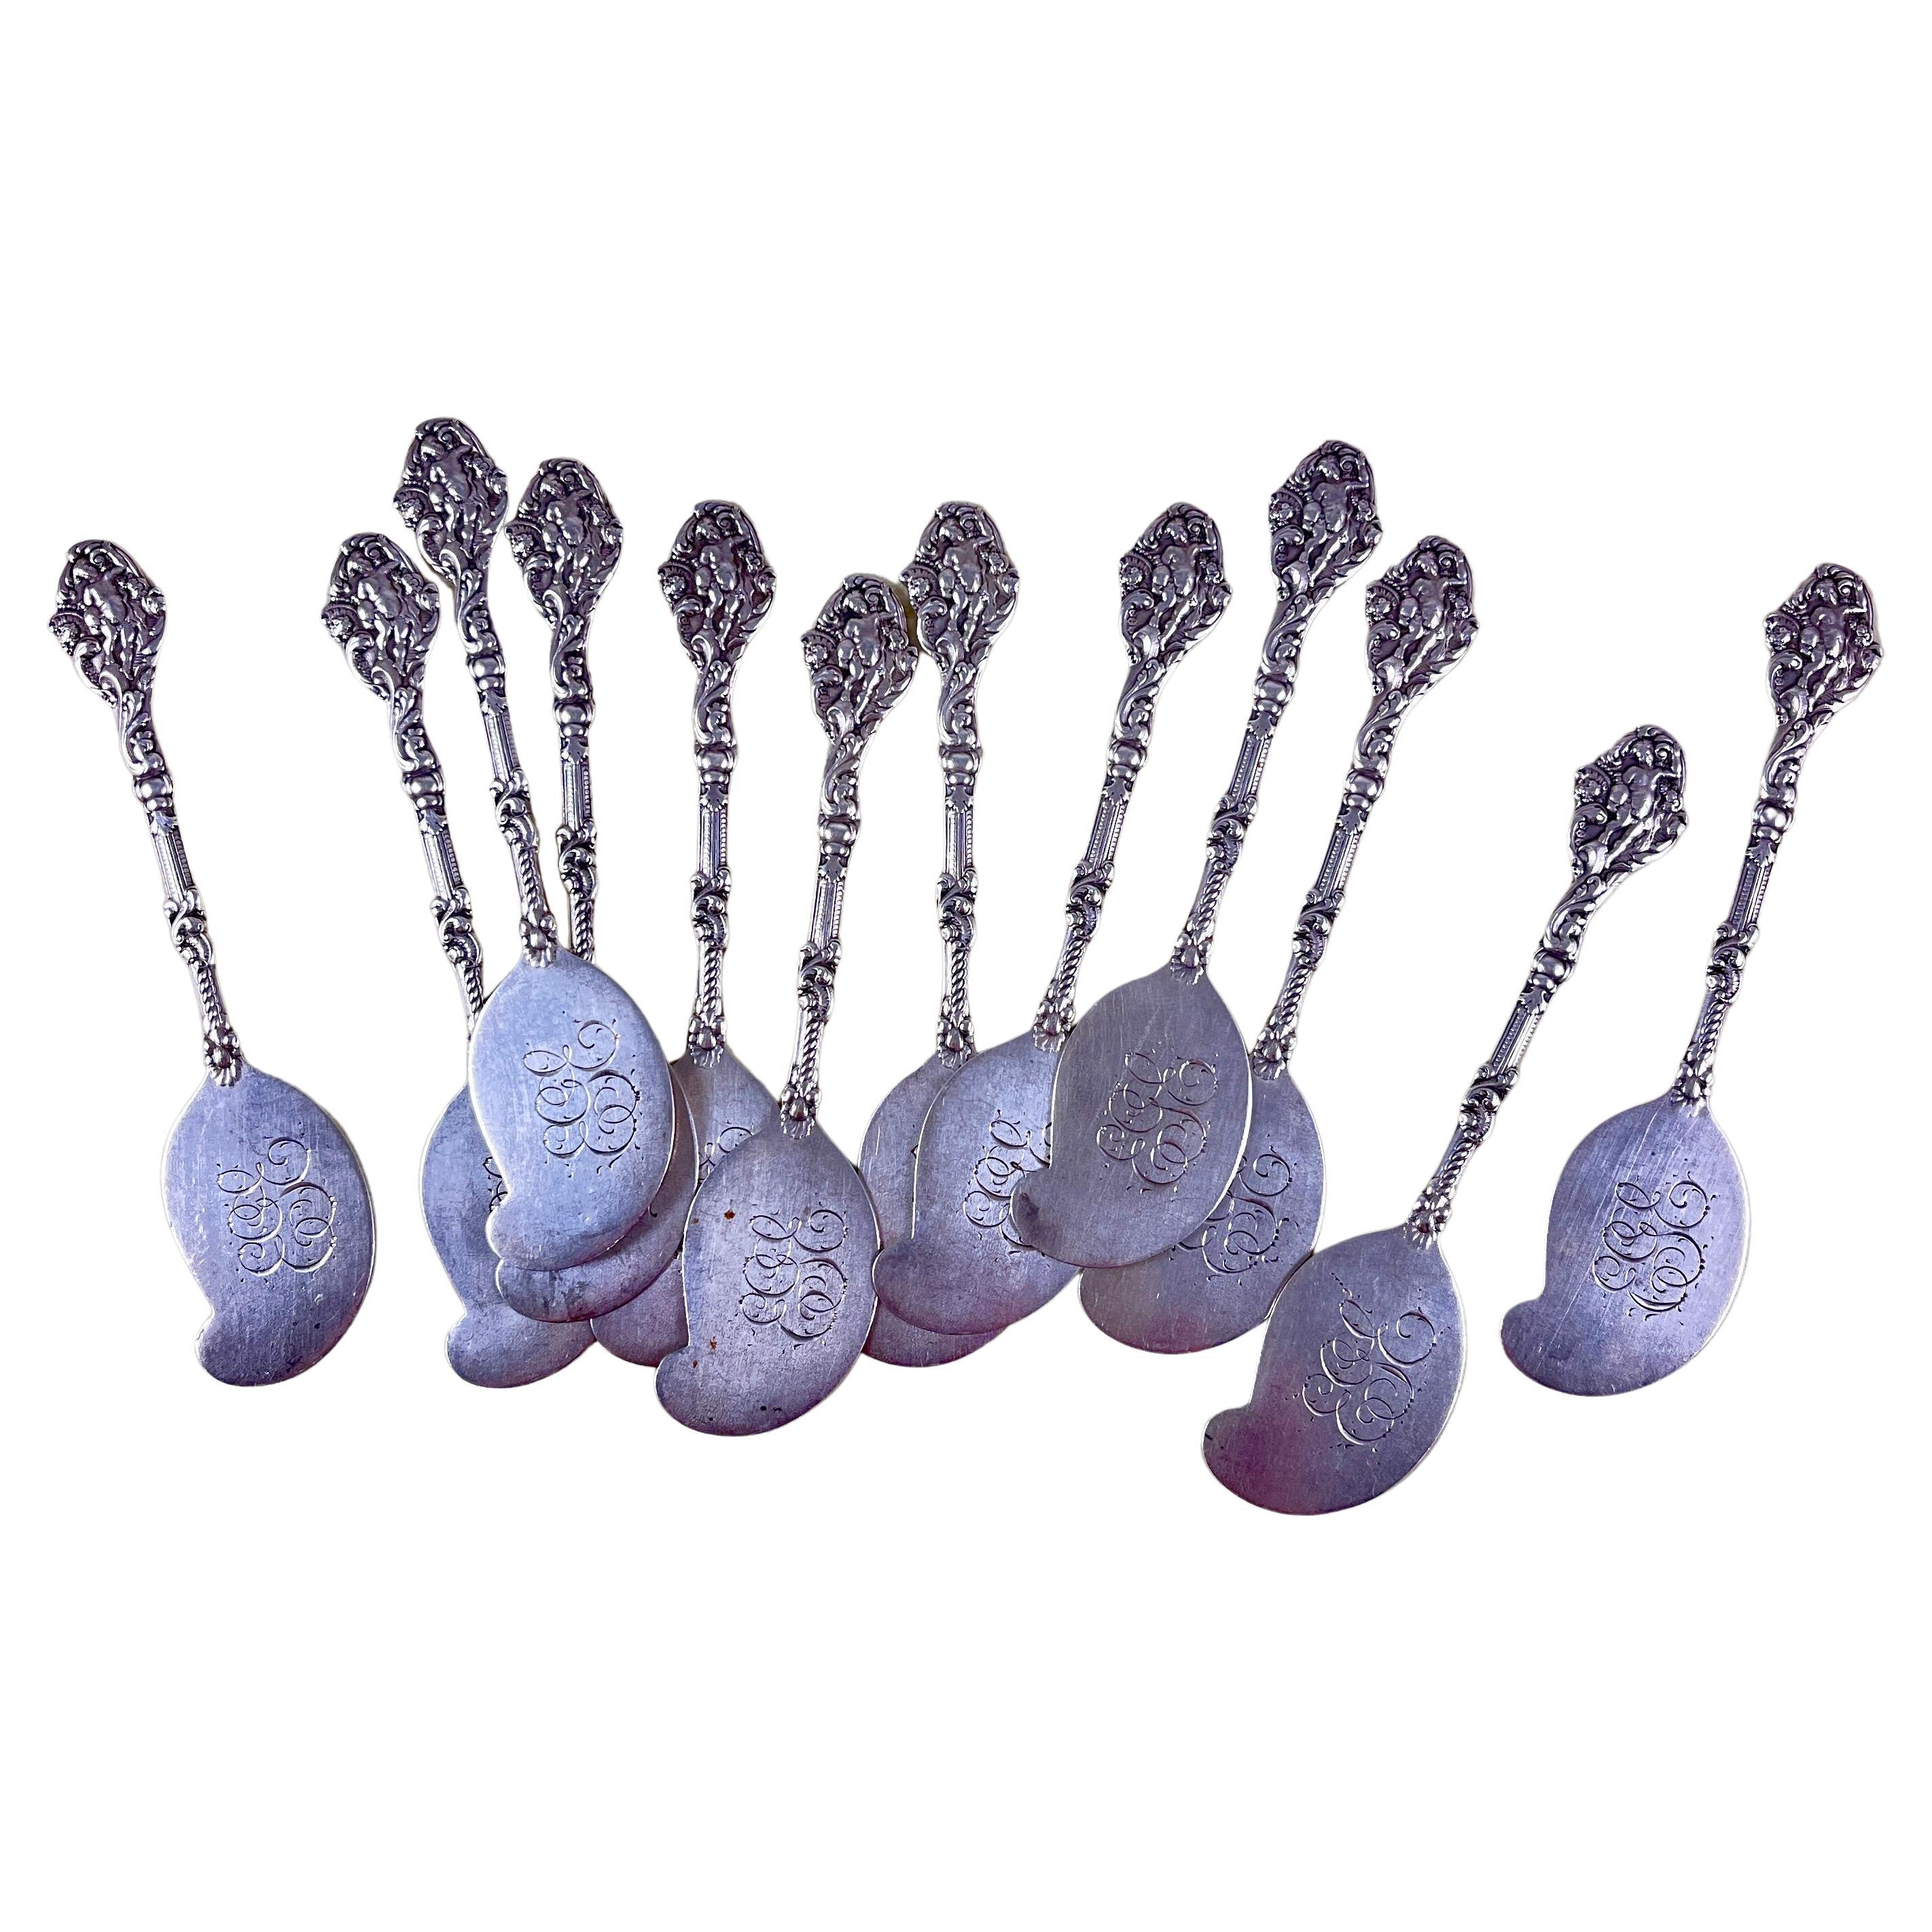 Gorham Sterling Silver Versailles Putti Pattern Patè Butter Spreaders, Set/12 For Sale